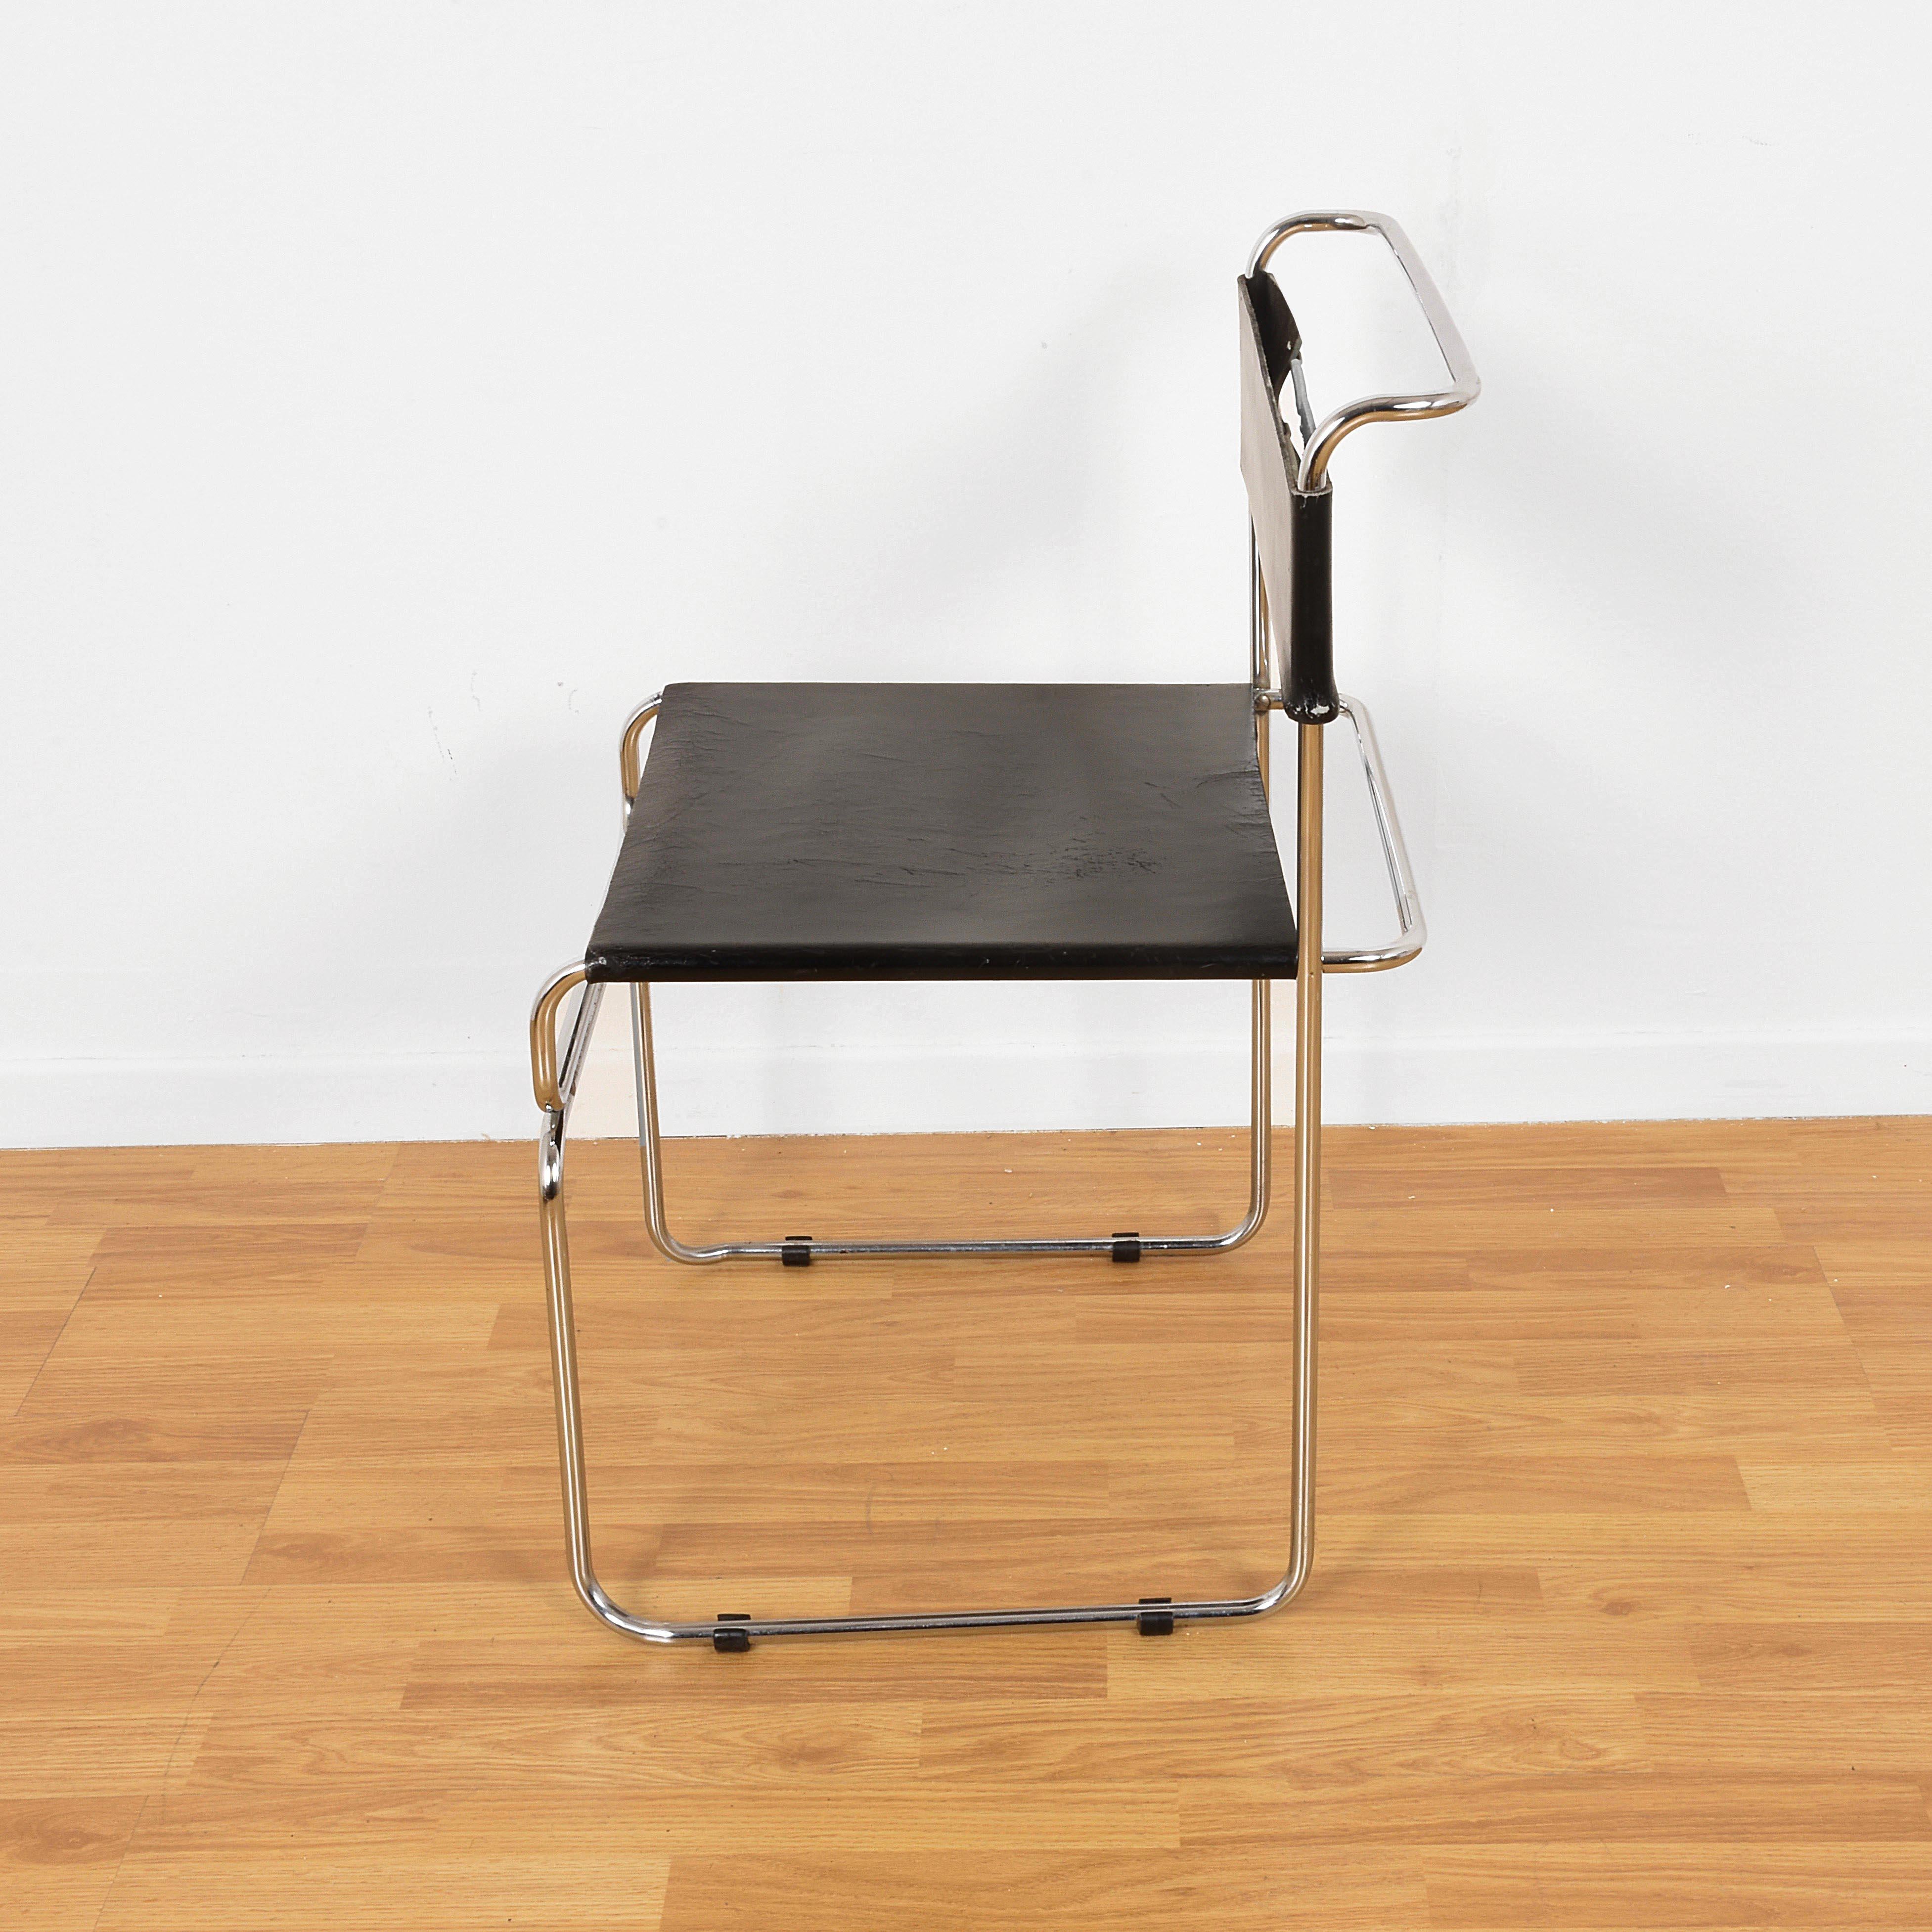 Two dining chairs, designed by Giovanni Carini and produced by Planula in 1970. Each chair has a tubular metal frame with a chrome finish; the seat and the back are in black leather.
Very practical because stackable.